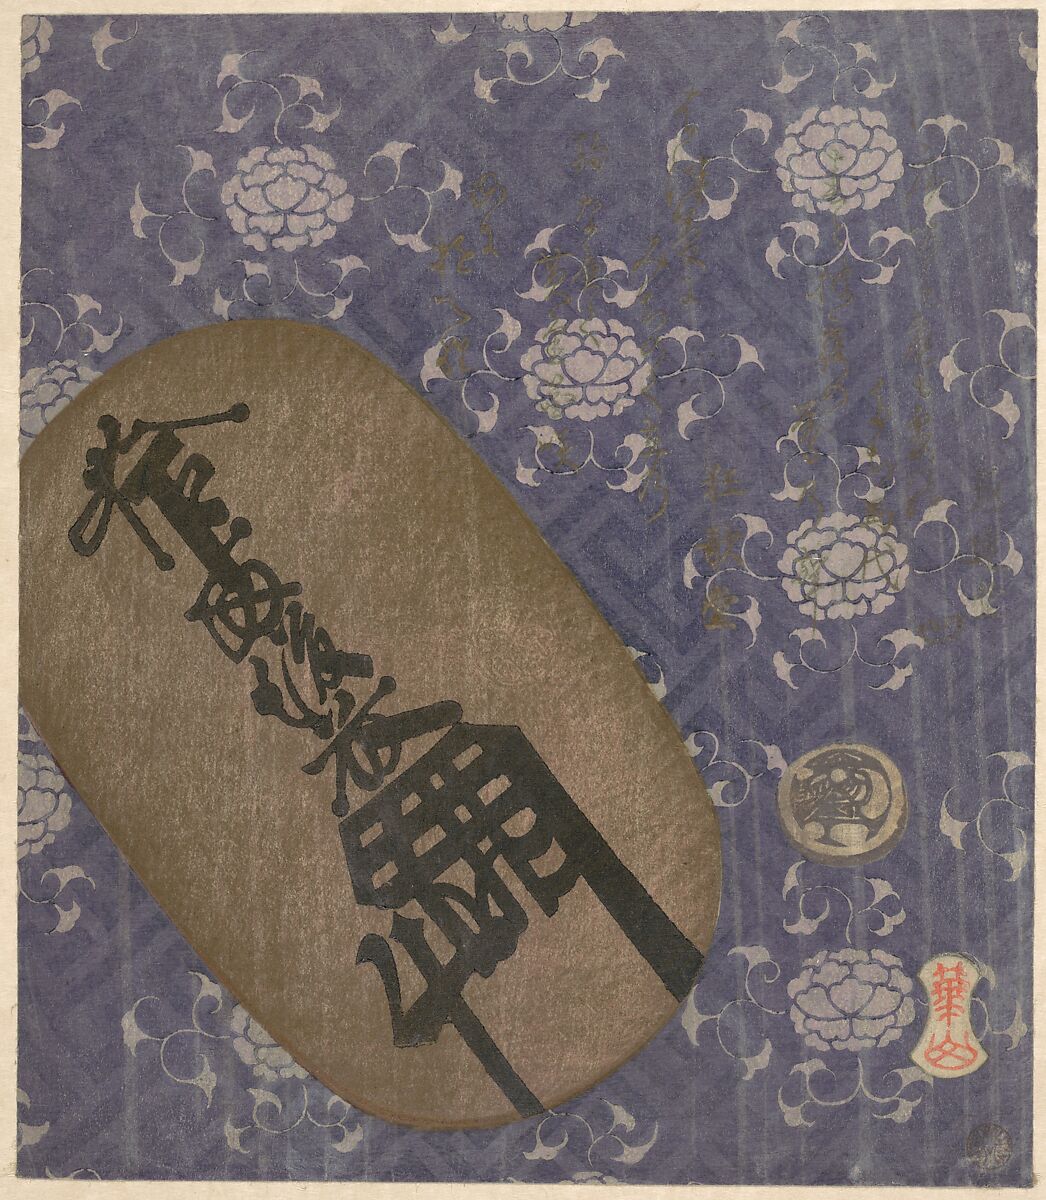 Ōban gold coin and mameita-gin silver “bean coin” against peony-motif decorated paper, Watanabe Kazan (Japanese, 1793–1841), Woodblock print (surimono); ink and color on paper, Japan 